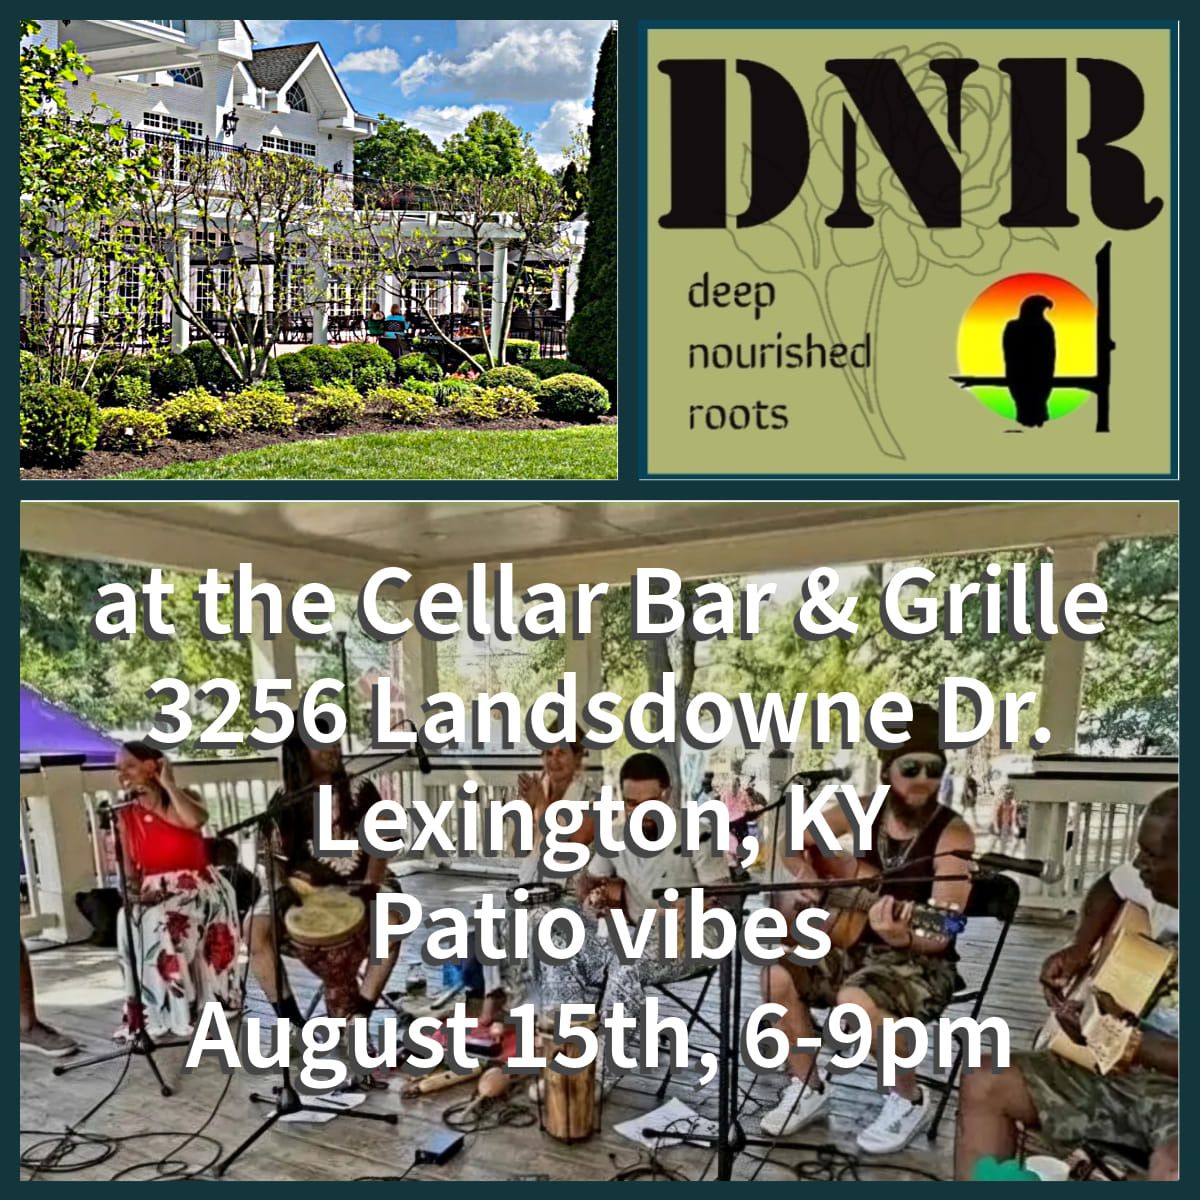 Reggae on the Patio at The Cellar Bar & Grille with DNR